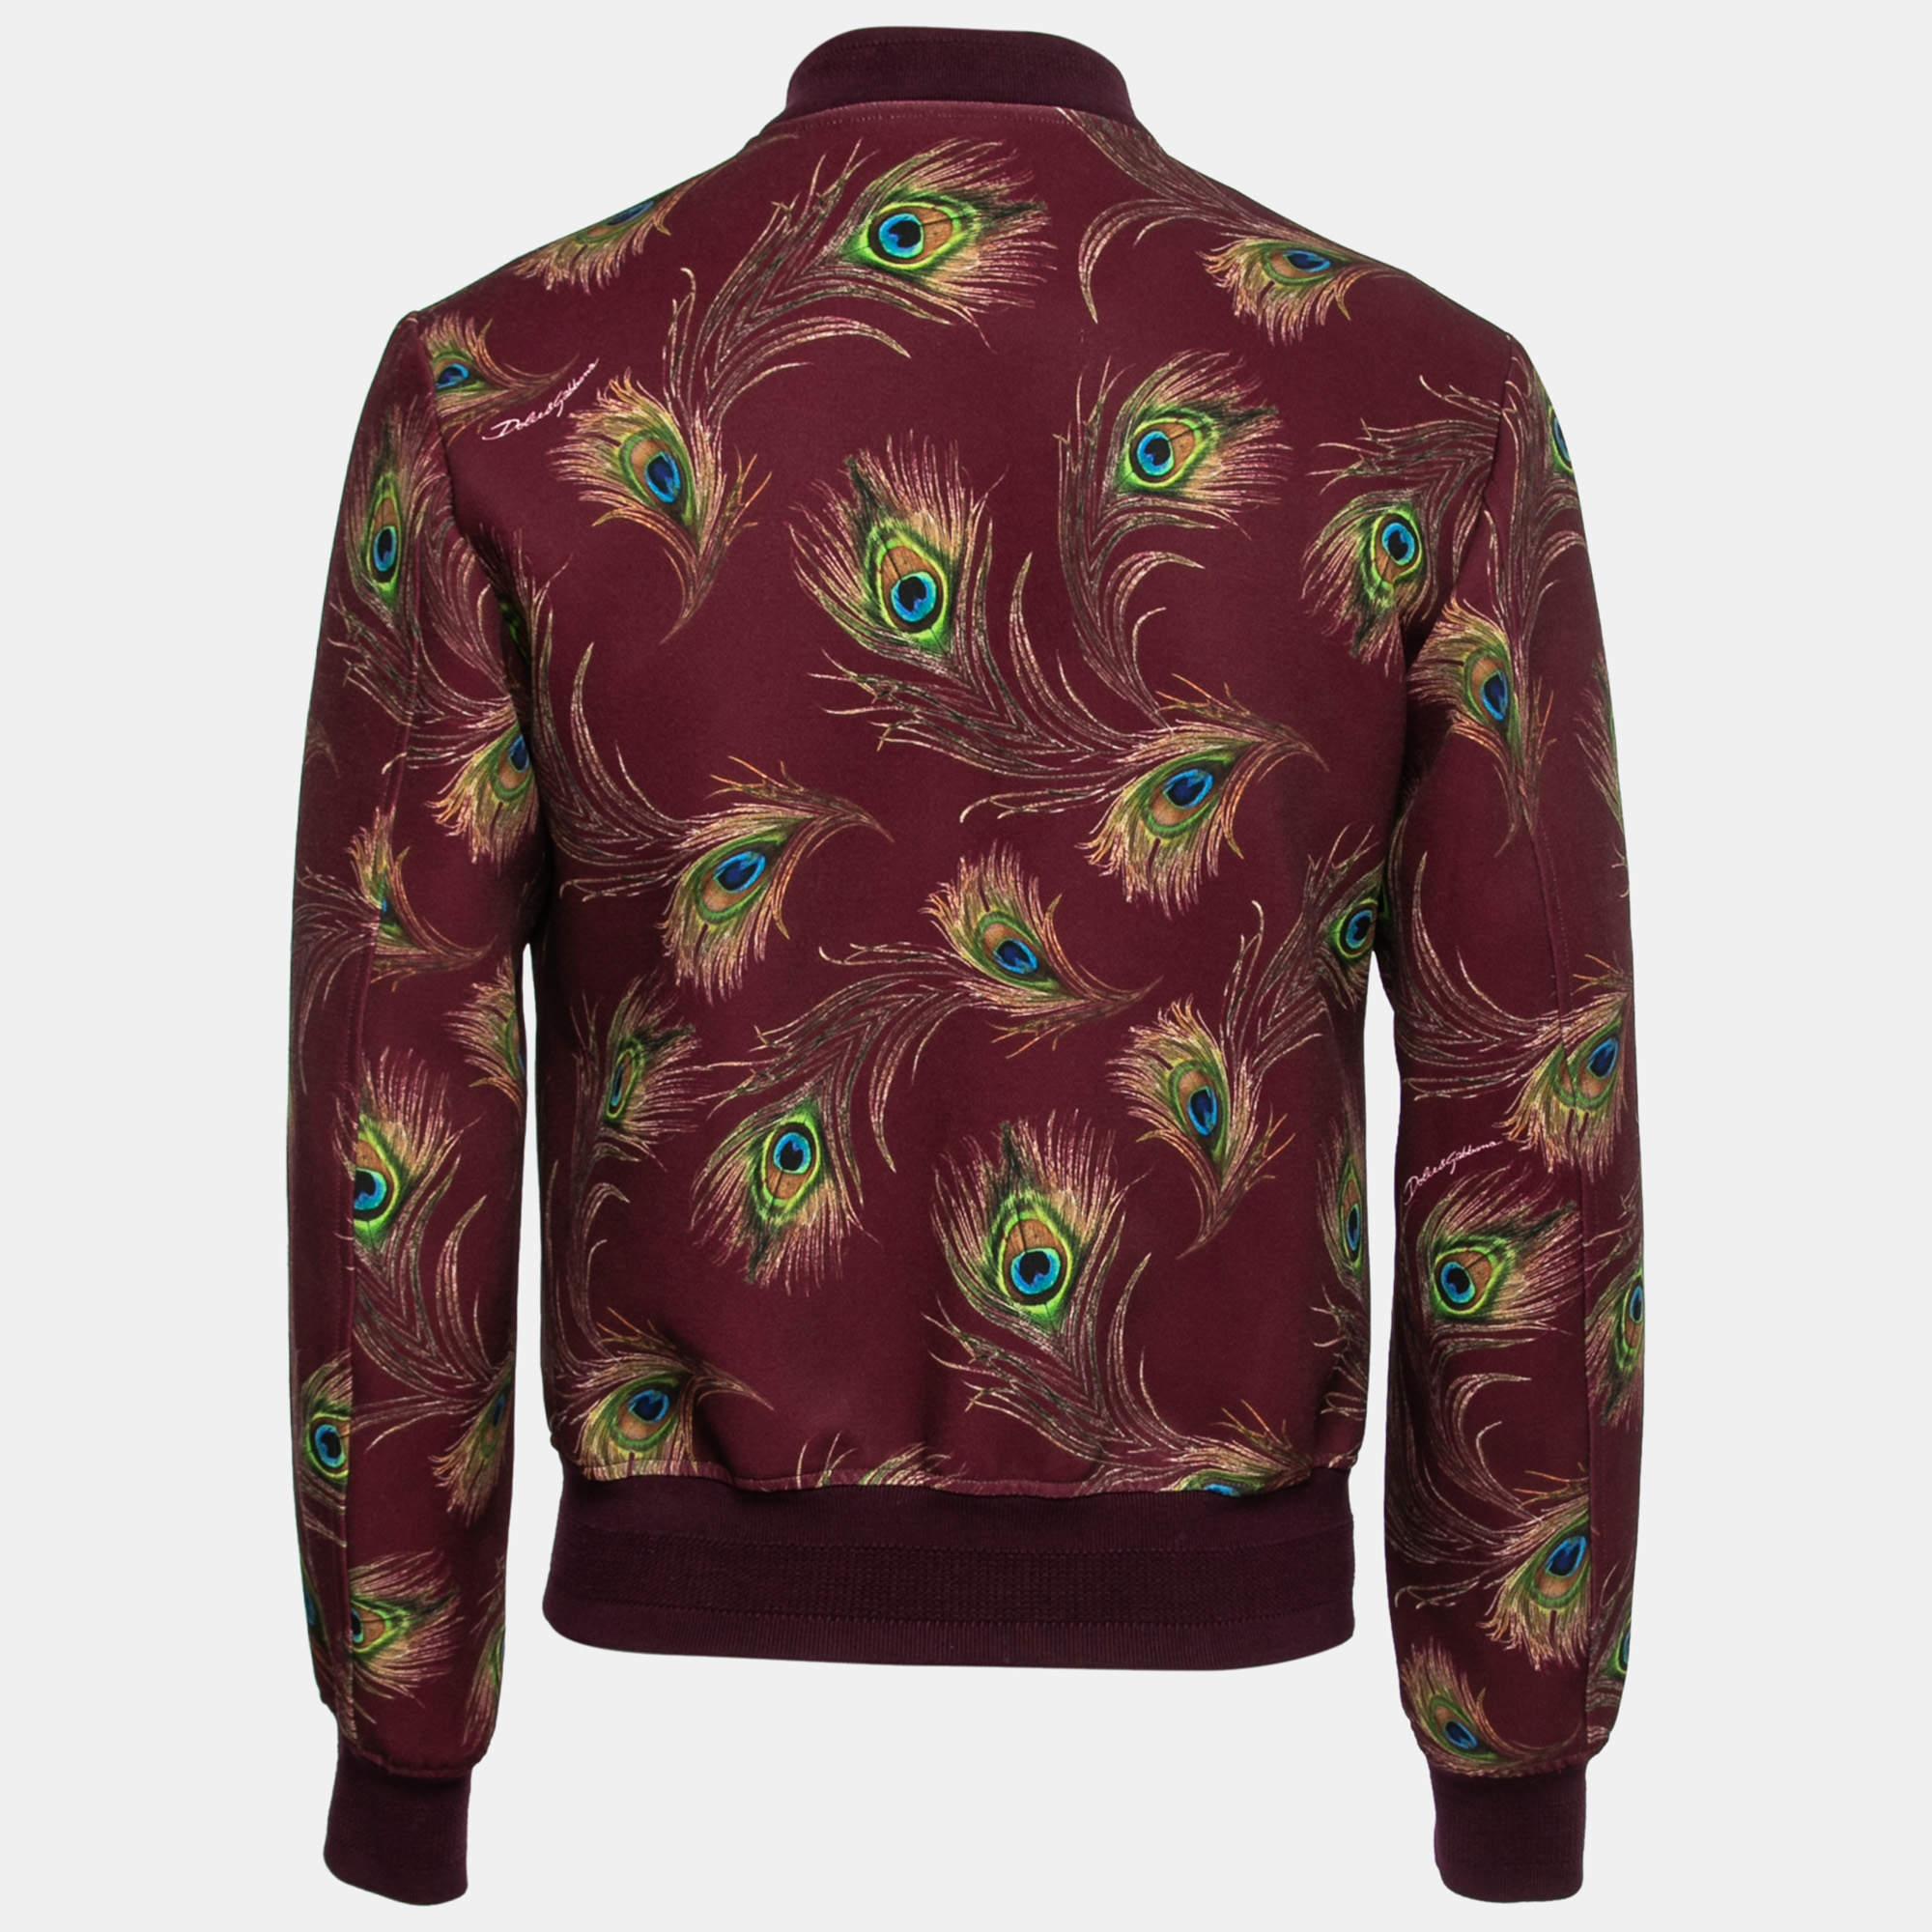 Stylish design, fine tailoring, and high quality come together in this bomber jacket from Dolce & Gabbana. Enhanced with a peacock feather print, this jacket for women is a 'casual style' must-have.

Includes: Brand Tag
